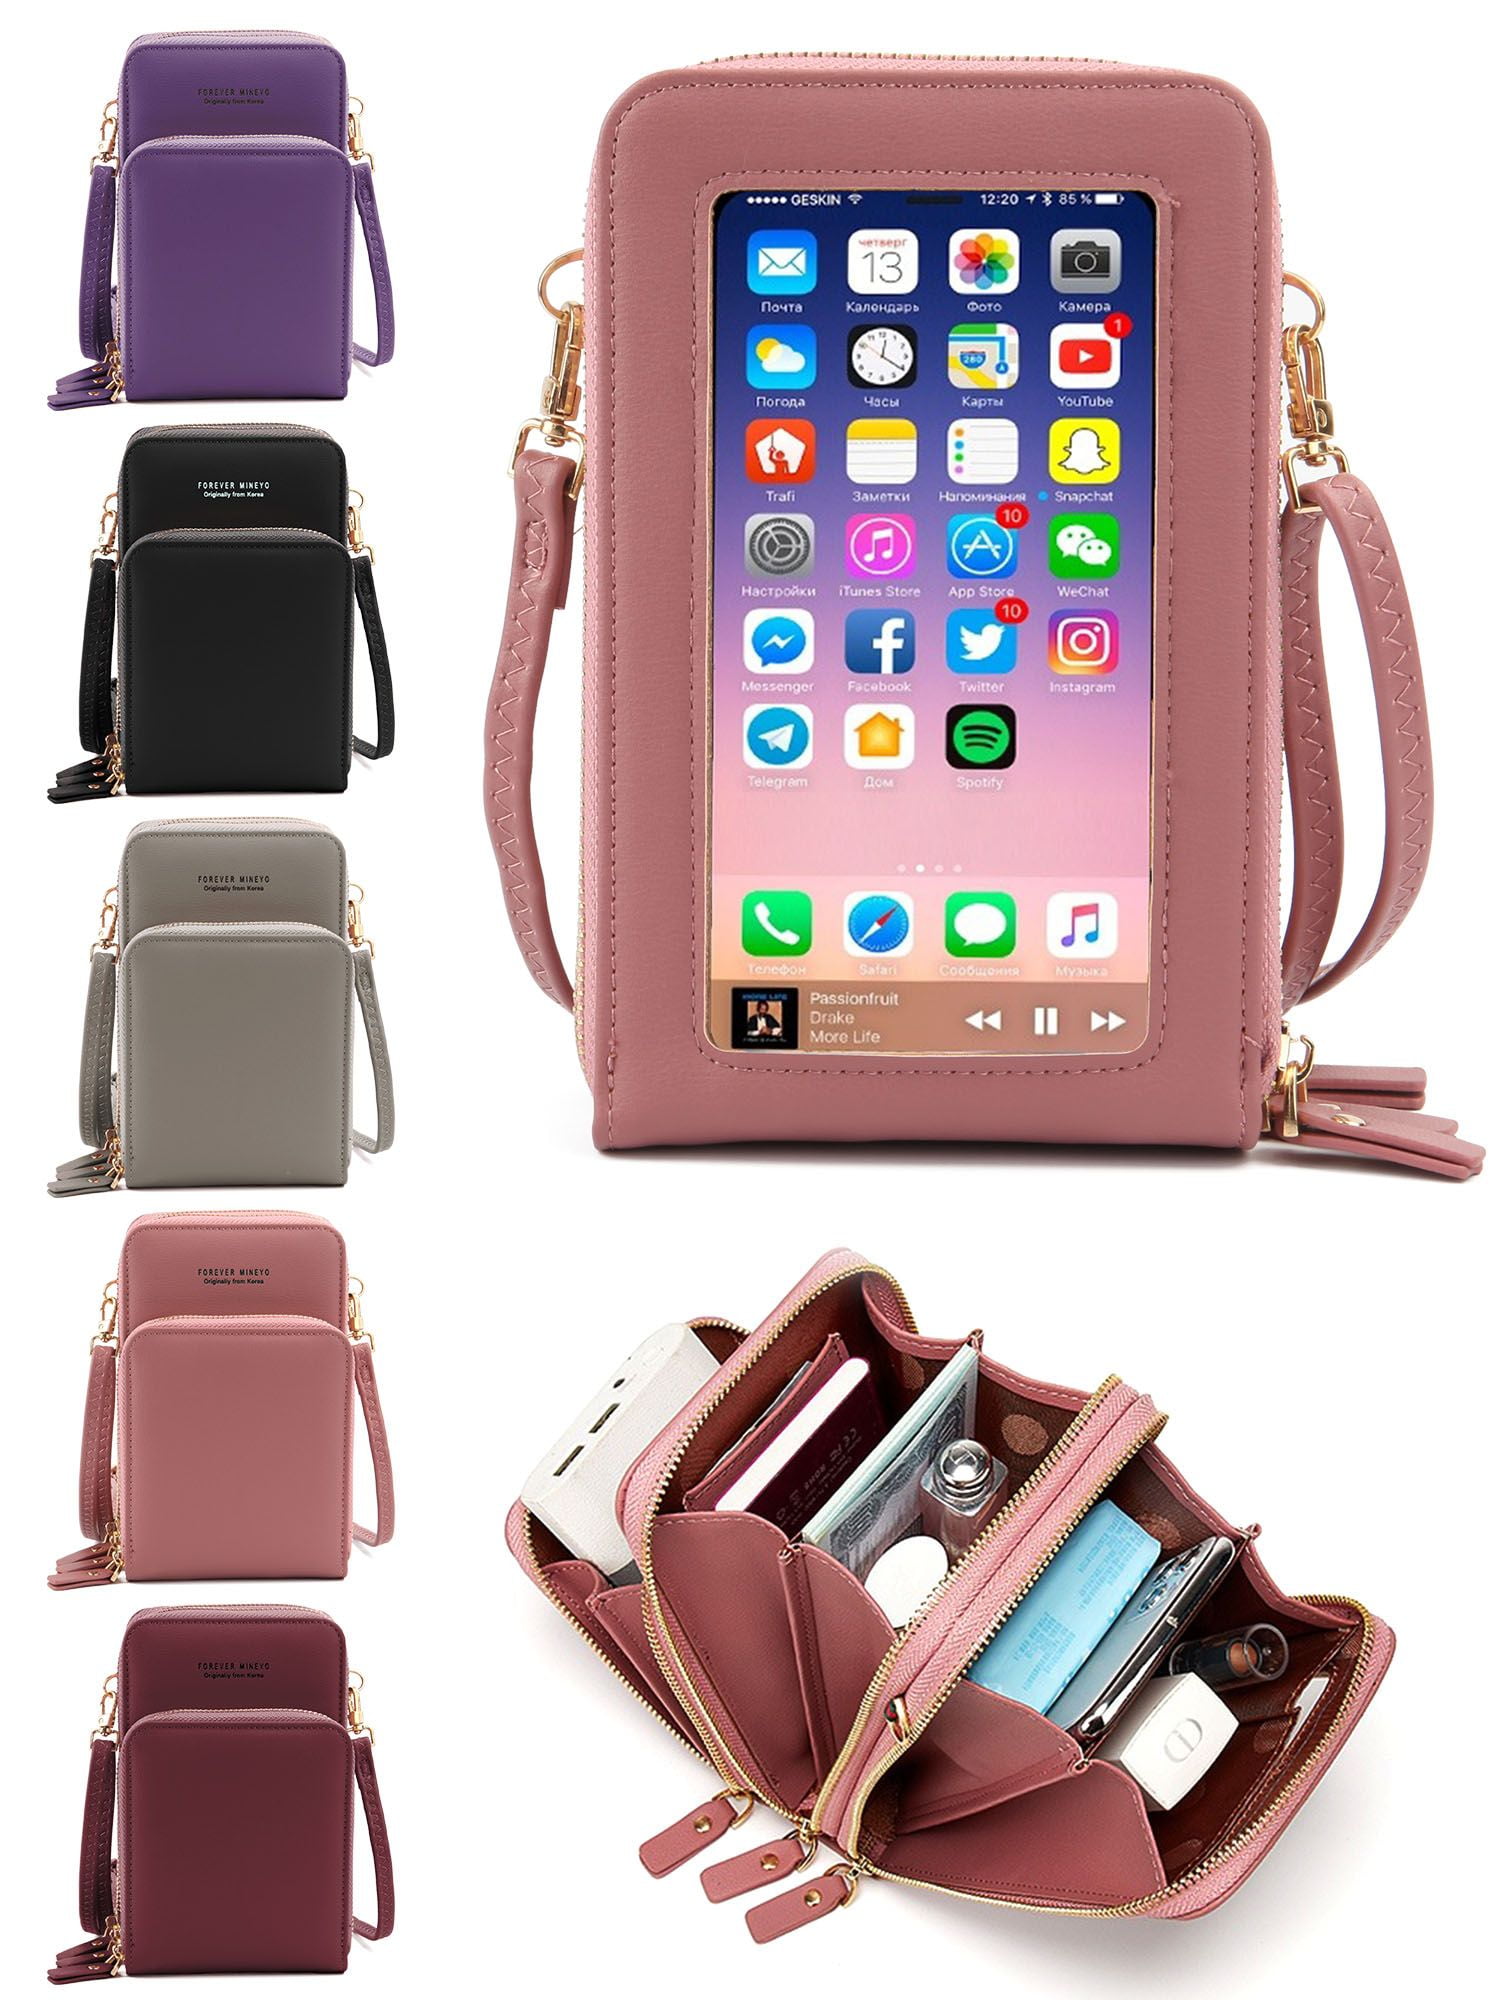 Spencer Women Crossbody Cellphone Pouch Waterproof Purse Wallet Touch Screen Shoulder Bag For iPhone 12 12 Pro Max 11 Max 11 Pro XS Max Red b545a8cc 35fc 4de7 8581 bc8e9276e092.eabb00ced020a27429b2fdf285b350cd